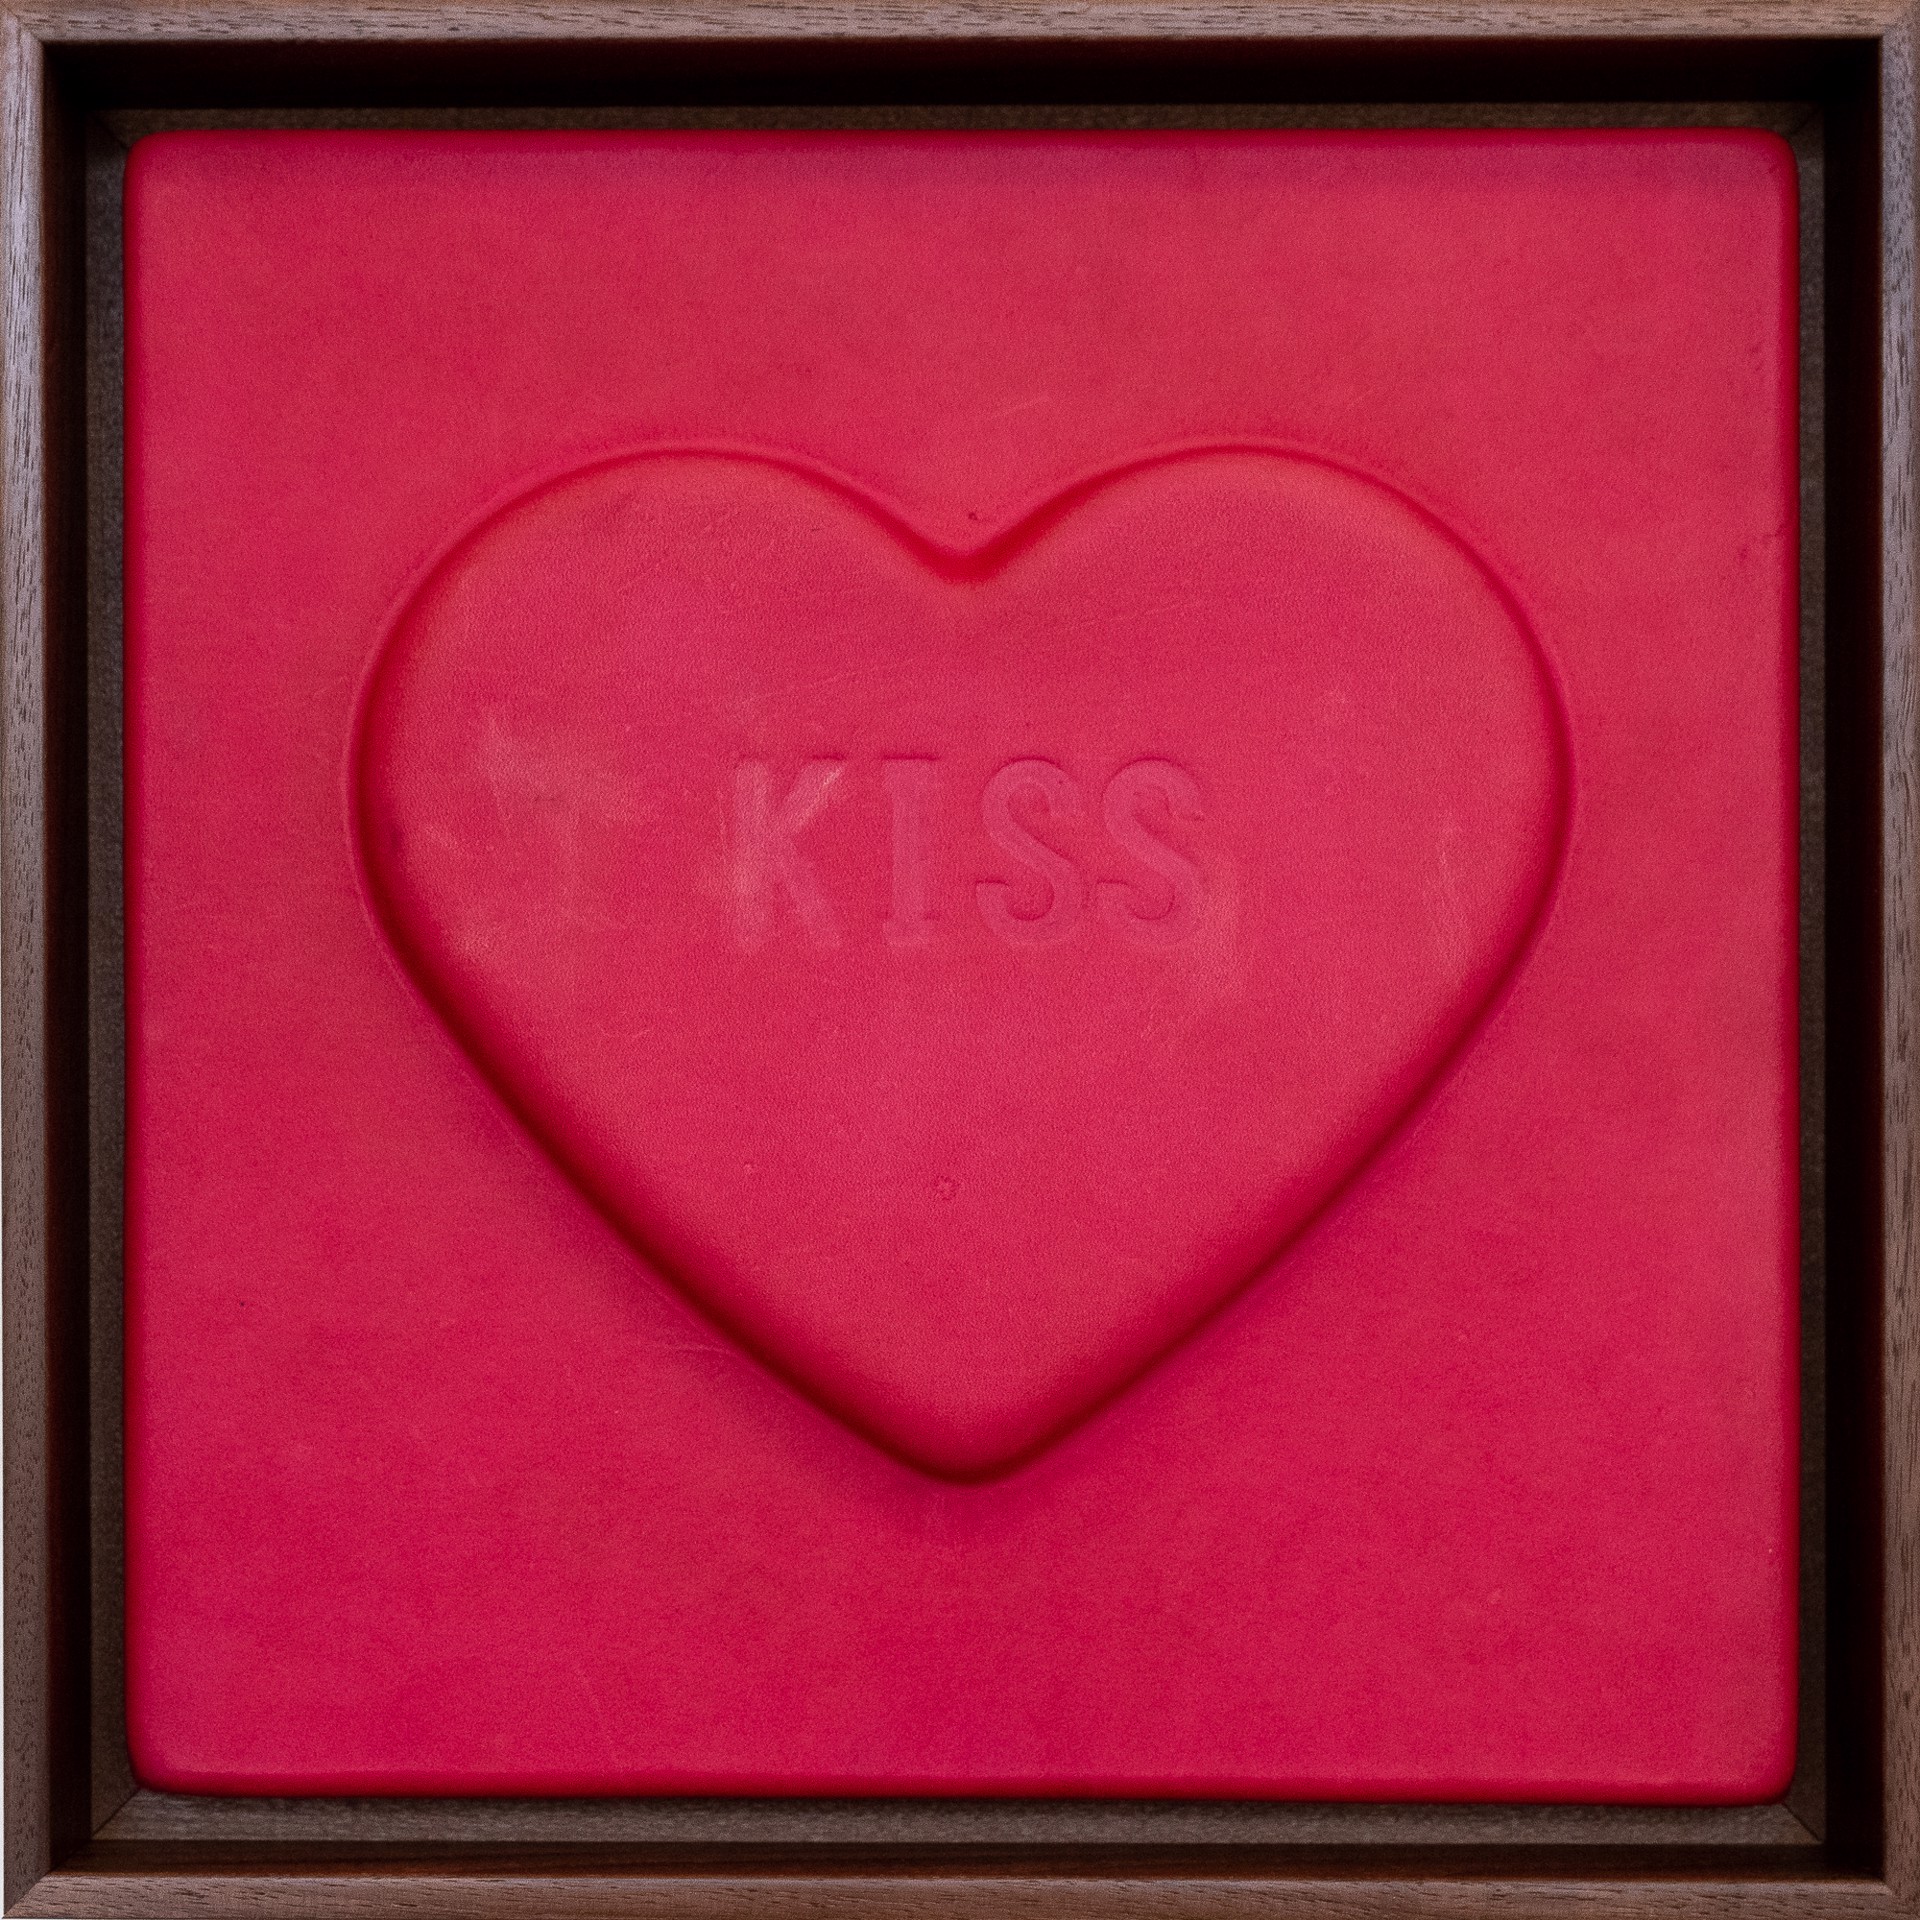 'Kiss' - Sweetheart series by Mx. Hyde